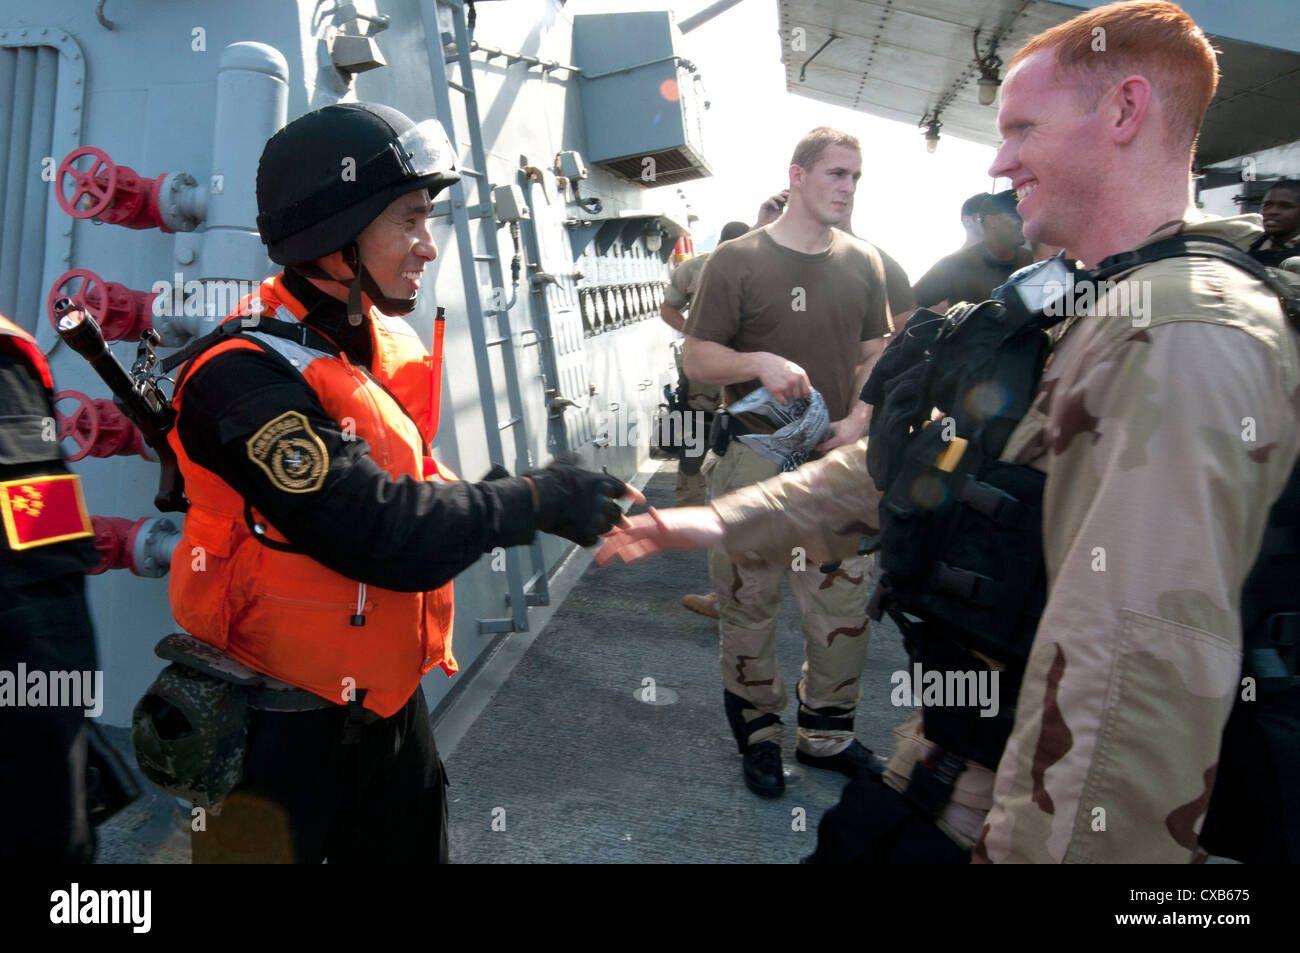 A US special forces team member aboard the guided-missile destroyer USS Winston S. Churchill shakes hands with a special forces member from the Chinese Peoples Liberation Army Navy frigate Yi Yang following a bilateral counter-piracy exercise. The focus of the exercise was American and Chinese naval cooperation in detecting, boarding, and searching suspected pirated vessels. Stock Photo